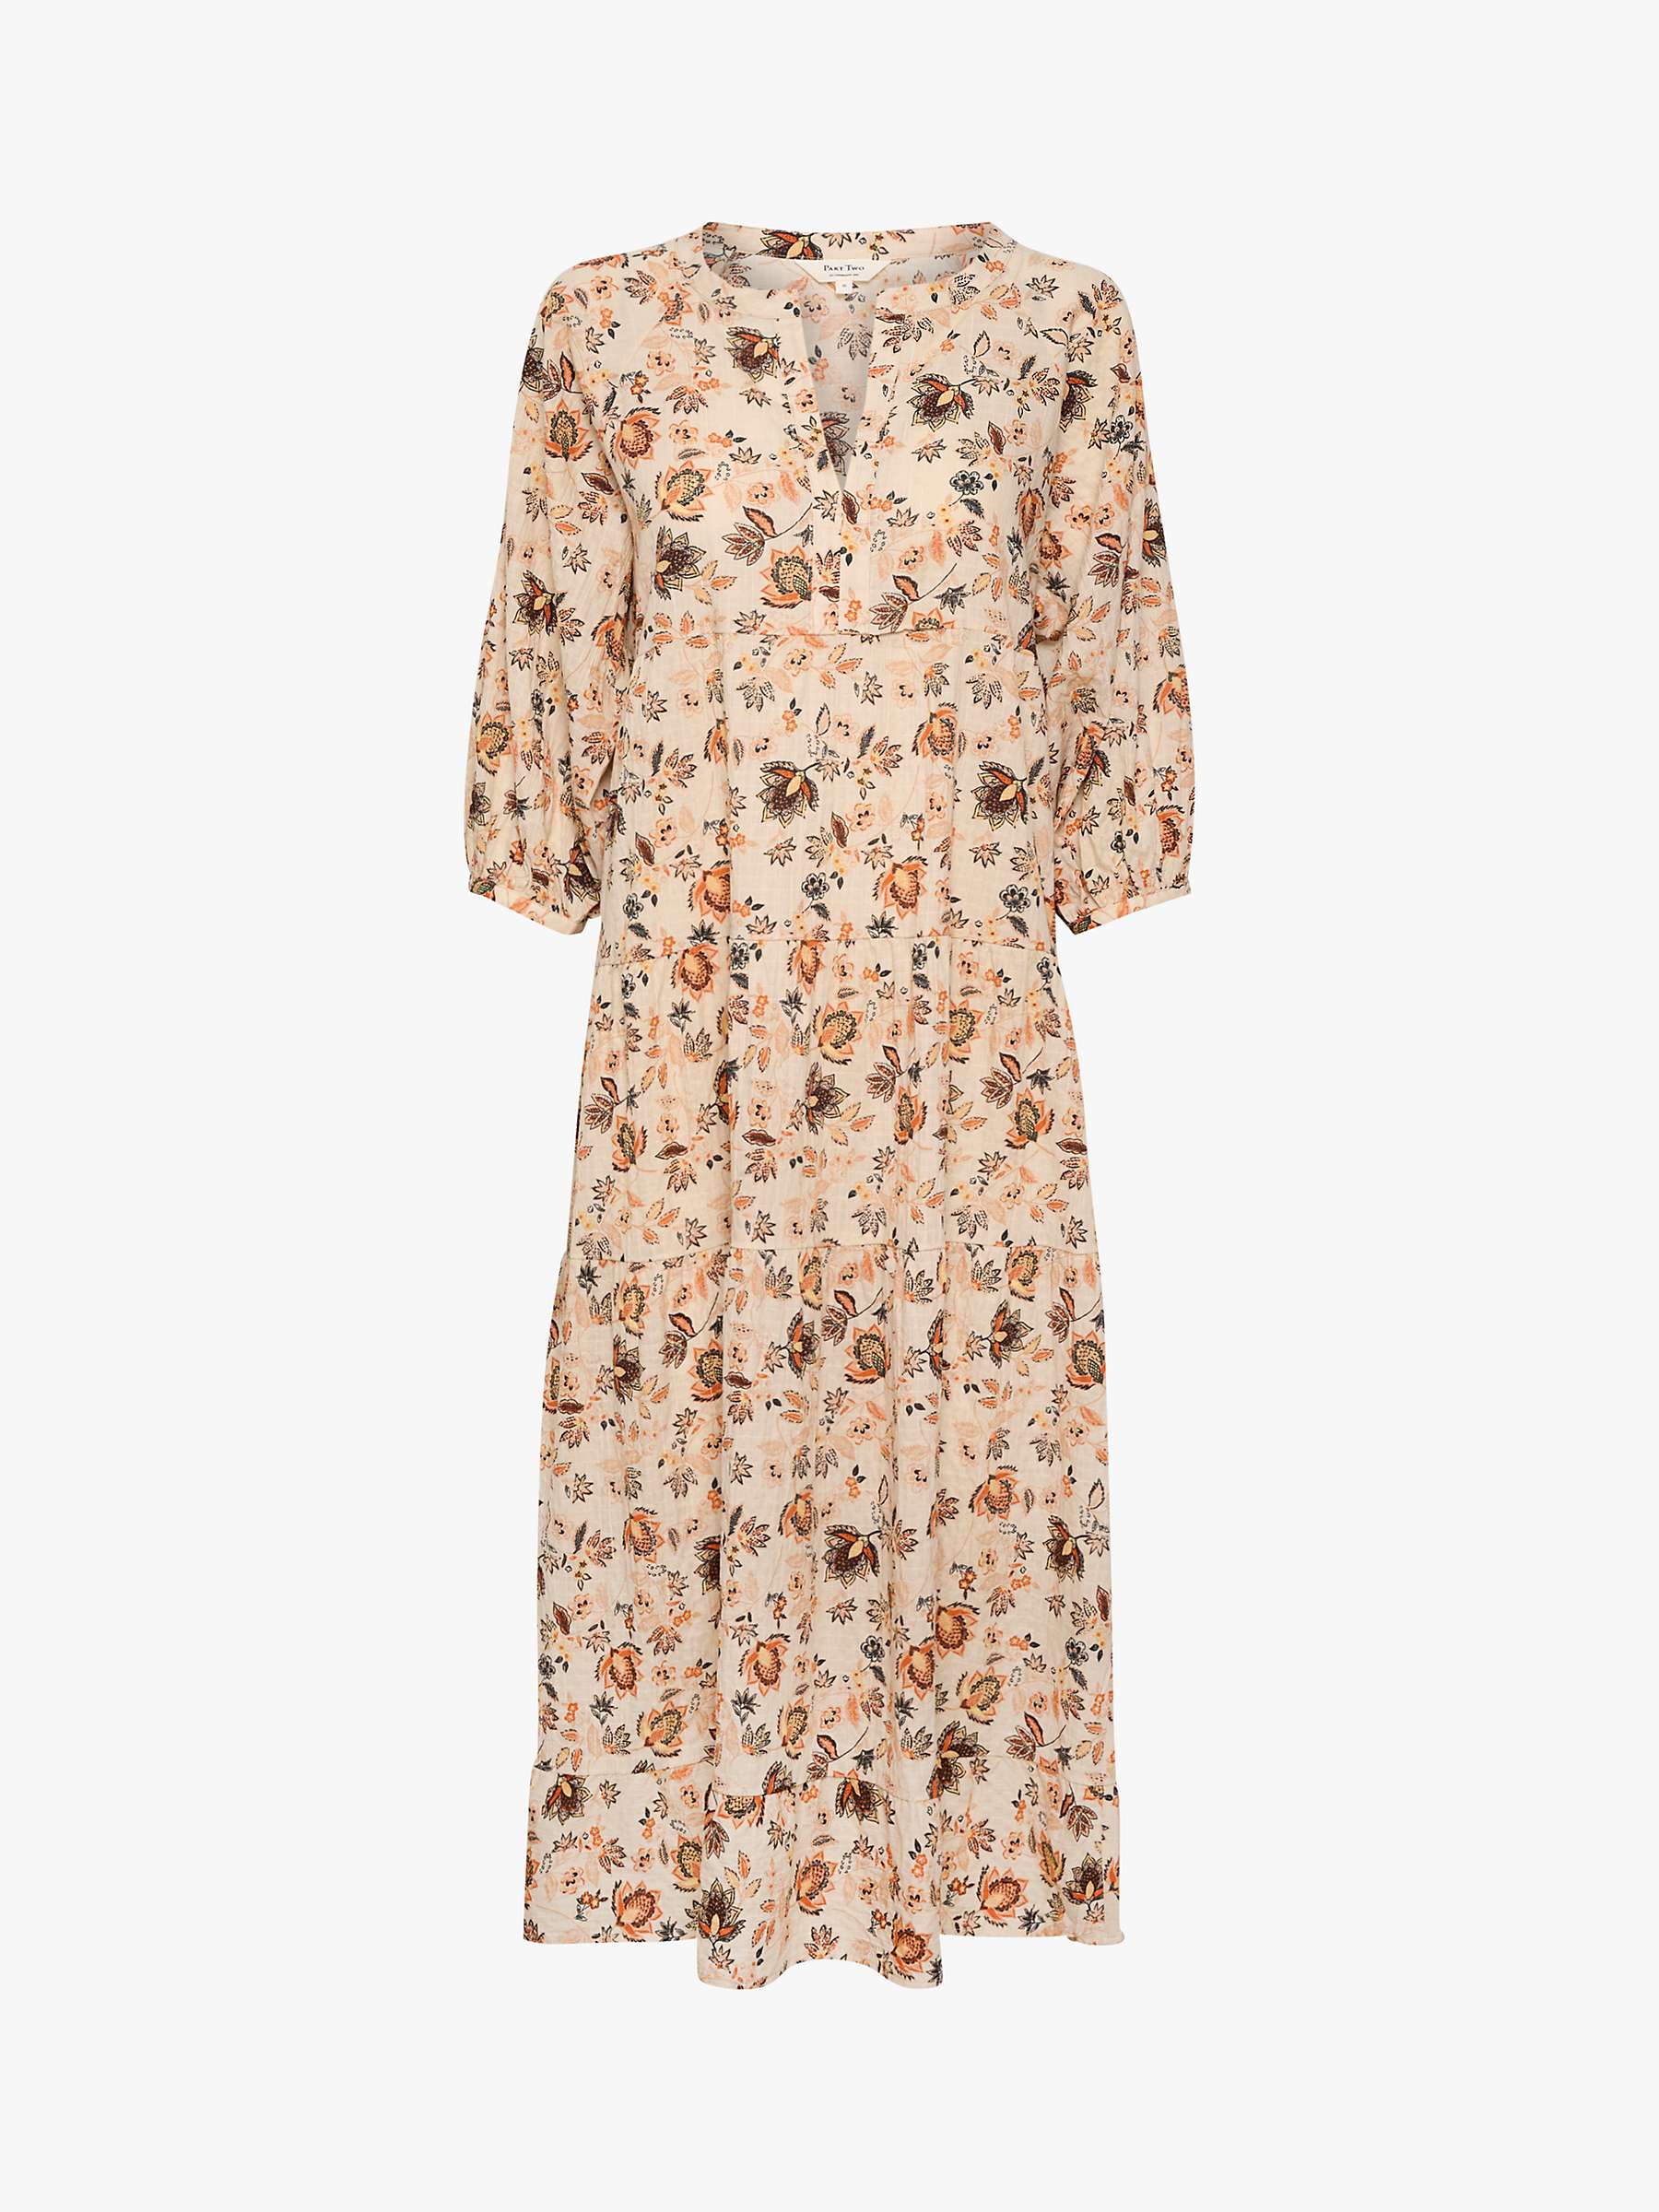 Buy Part Two Philine Floral Print Tiered Maxi Dress, Arabesque Ornament Online at johnlewis.com